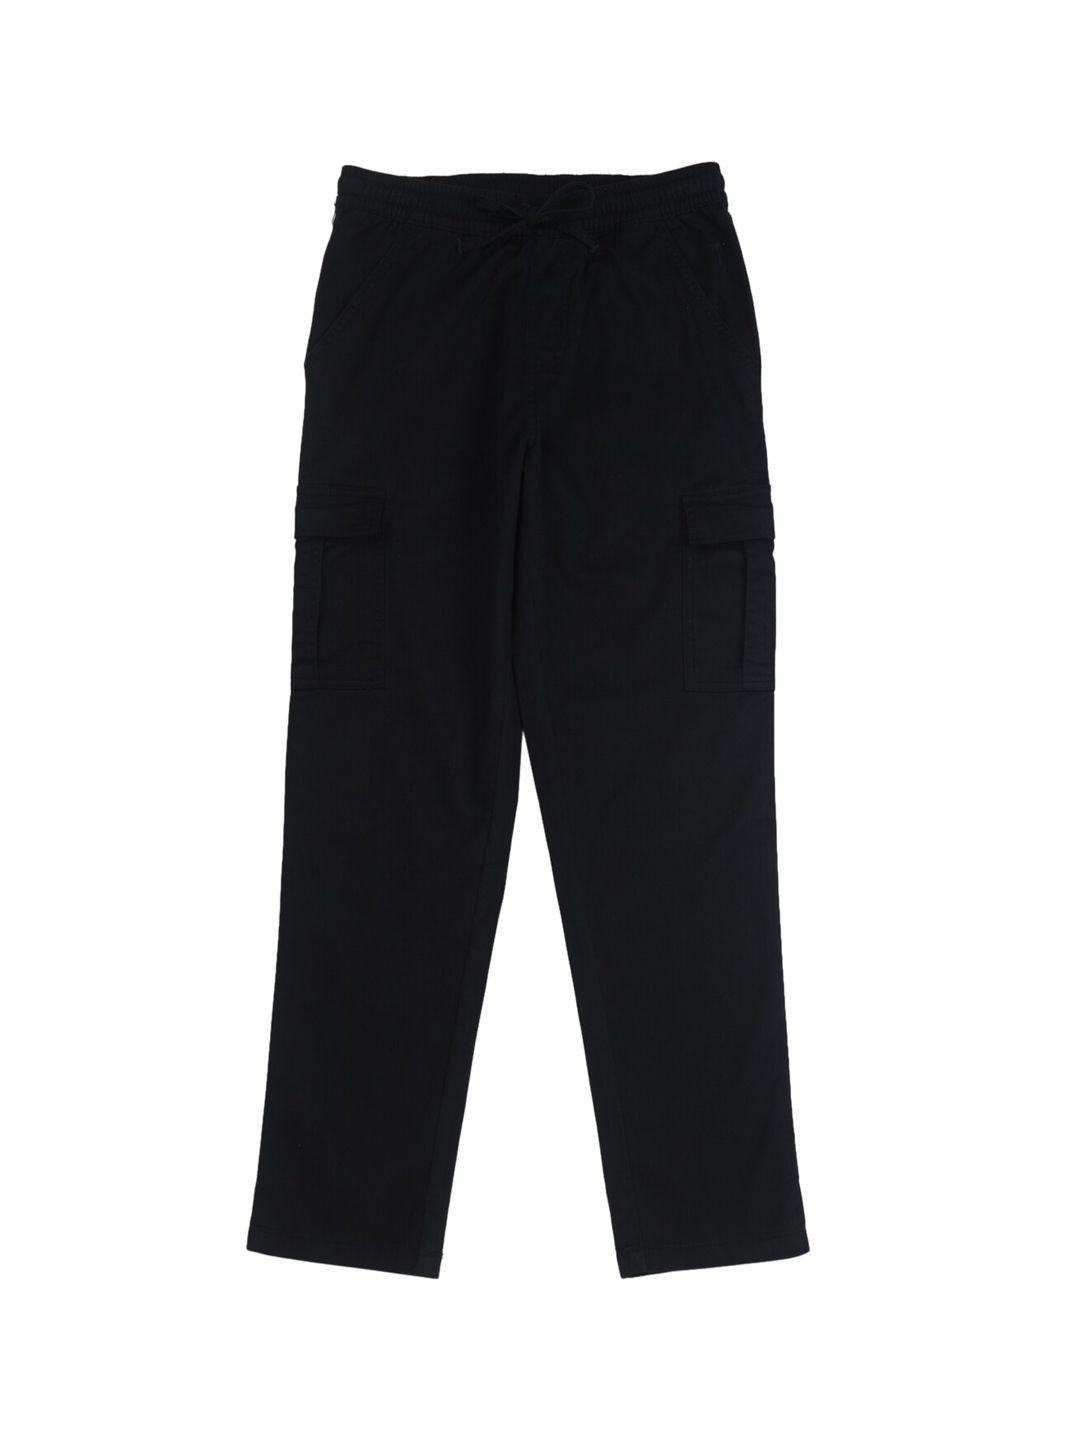 palm tree boys mid rise cotton cargos trousers